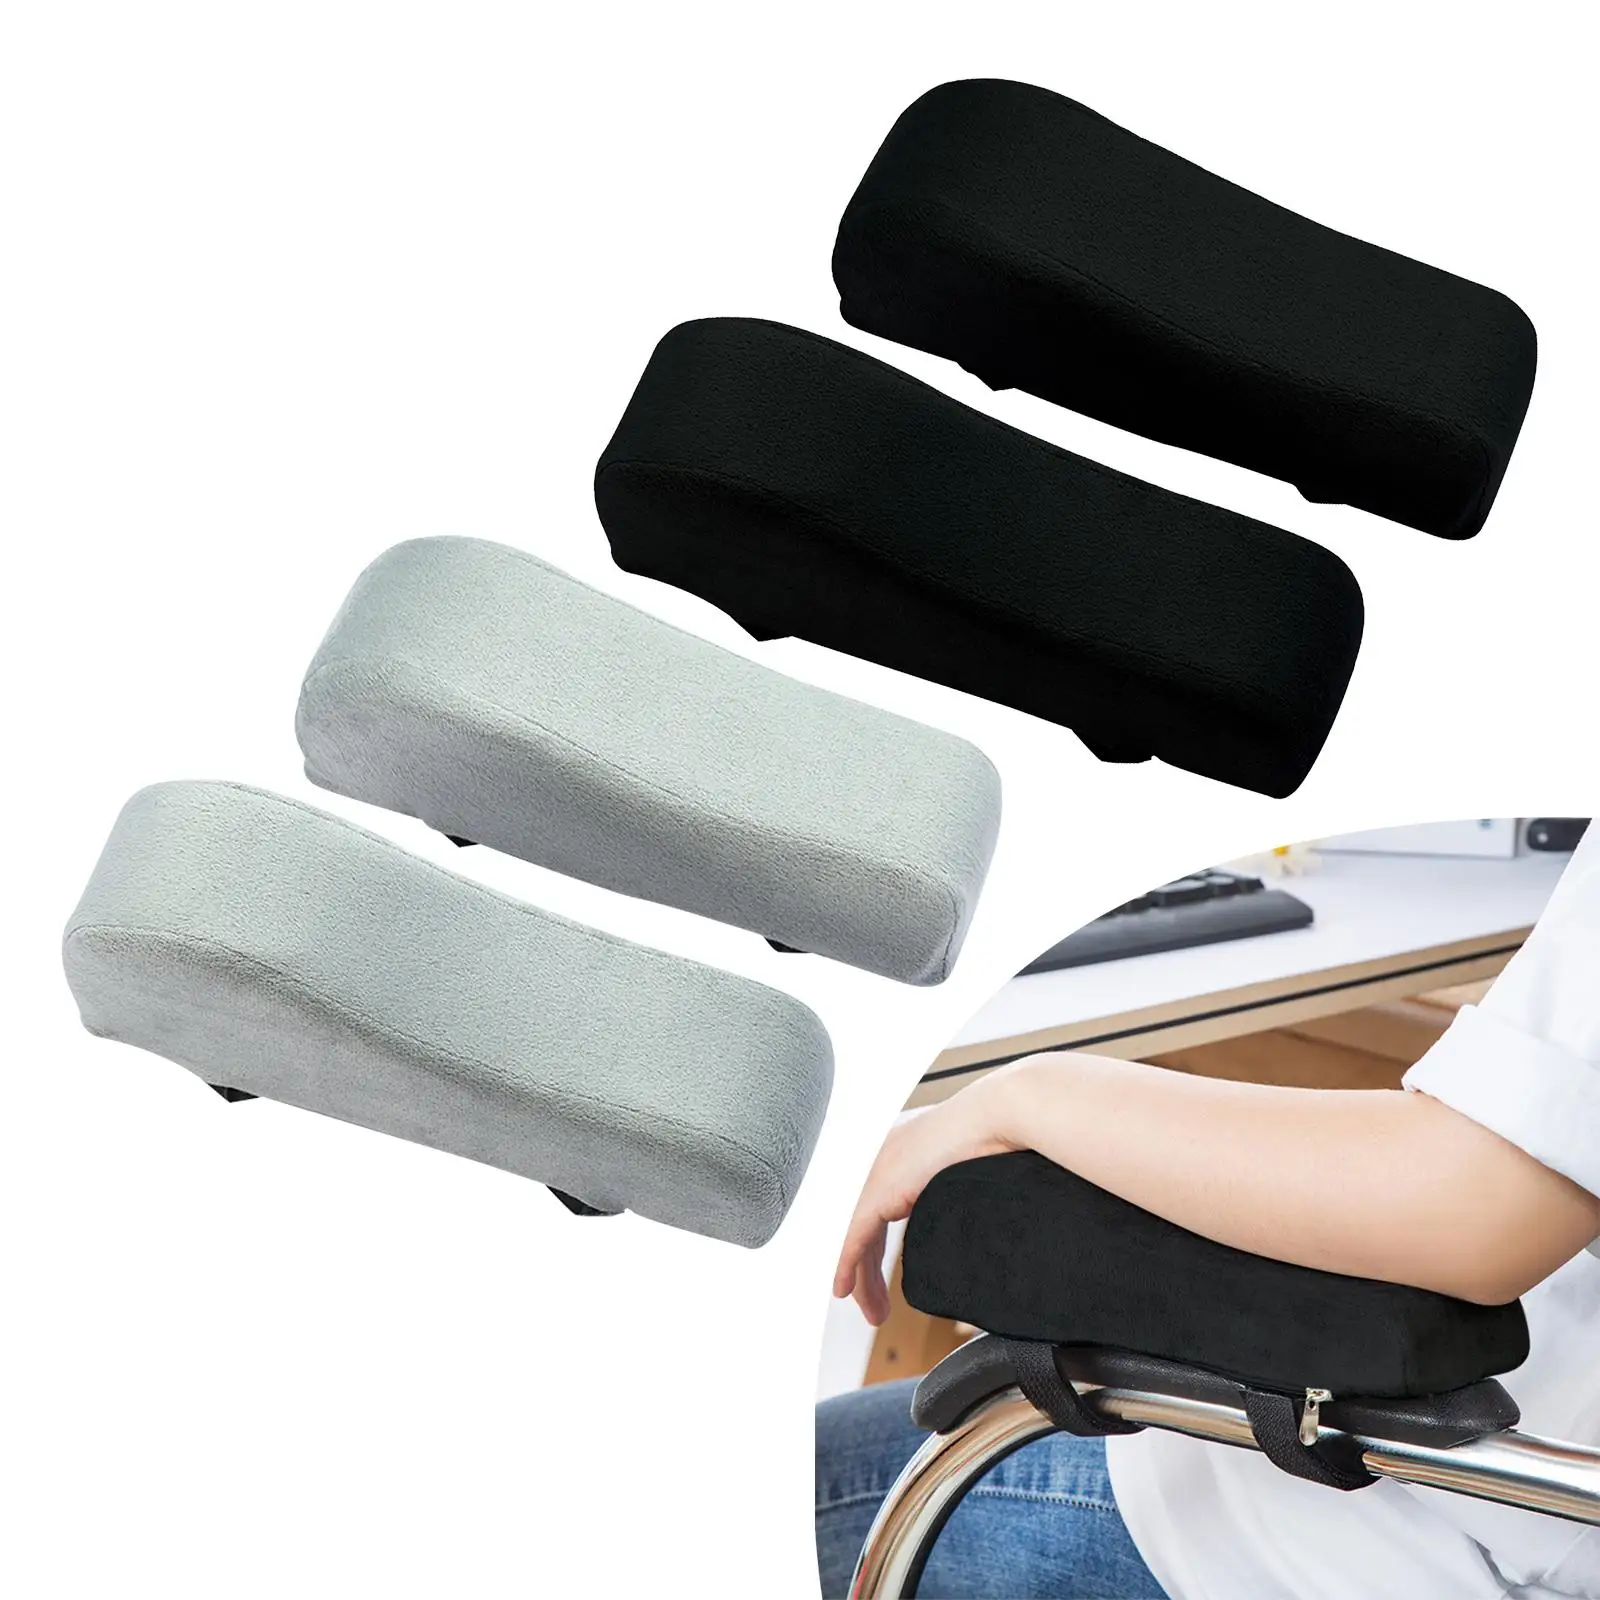 2x Universal Chair Armrest Cushions Soft Washable Arm Pads for Rocking Chair Offiice Home